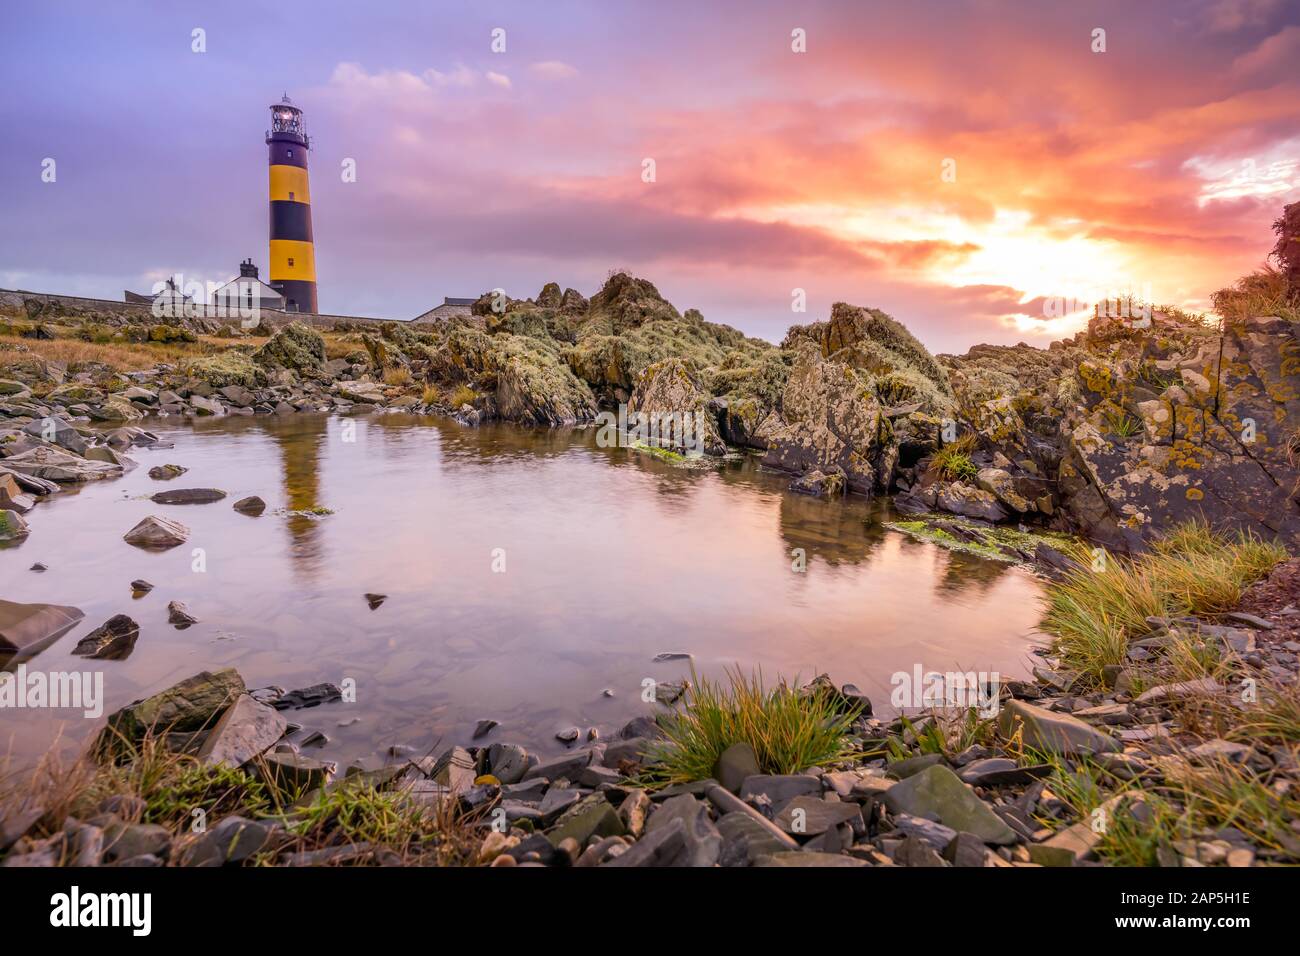 Amazing sunrise at St. Johns Point Lighthouse in County Down, Northern Ireland. Rocks reflected on small pond on coastline. Stock Photo